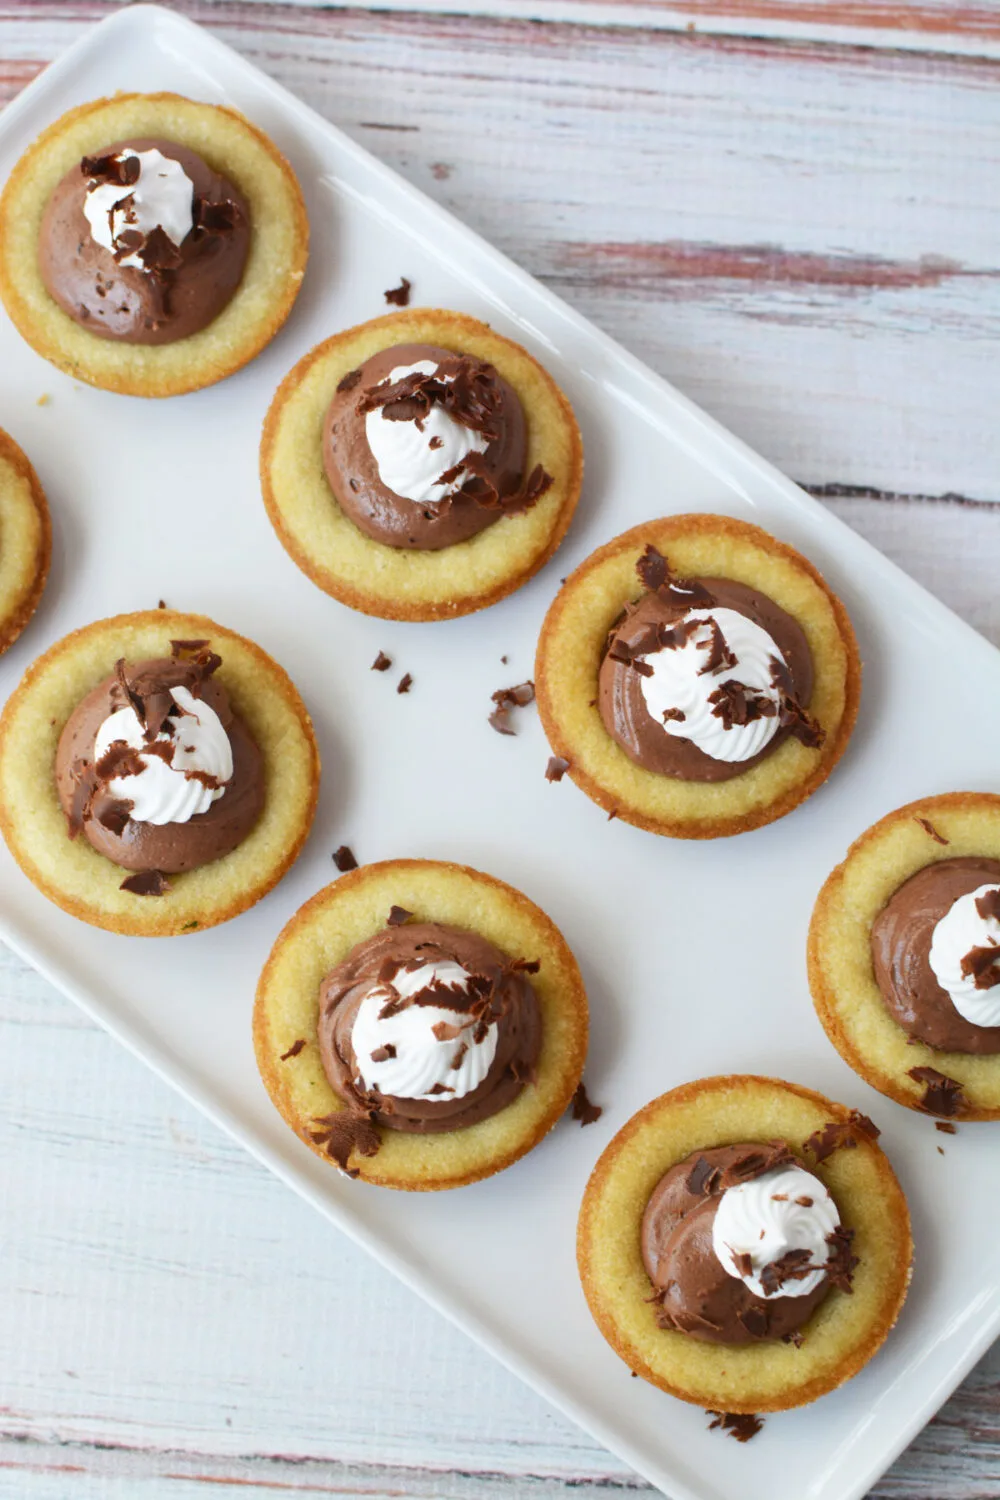 French silk pie cookies with whipped cream and chocolate shavings.